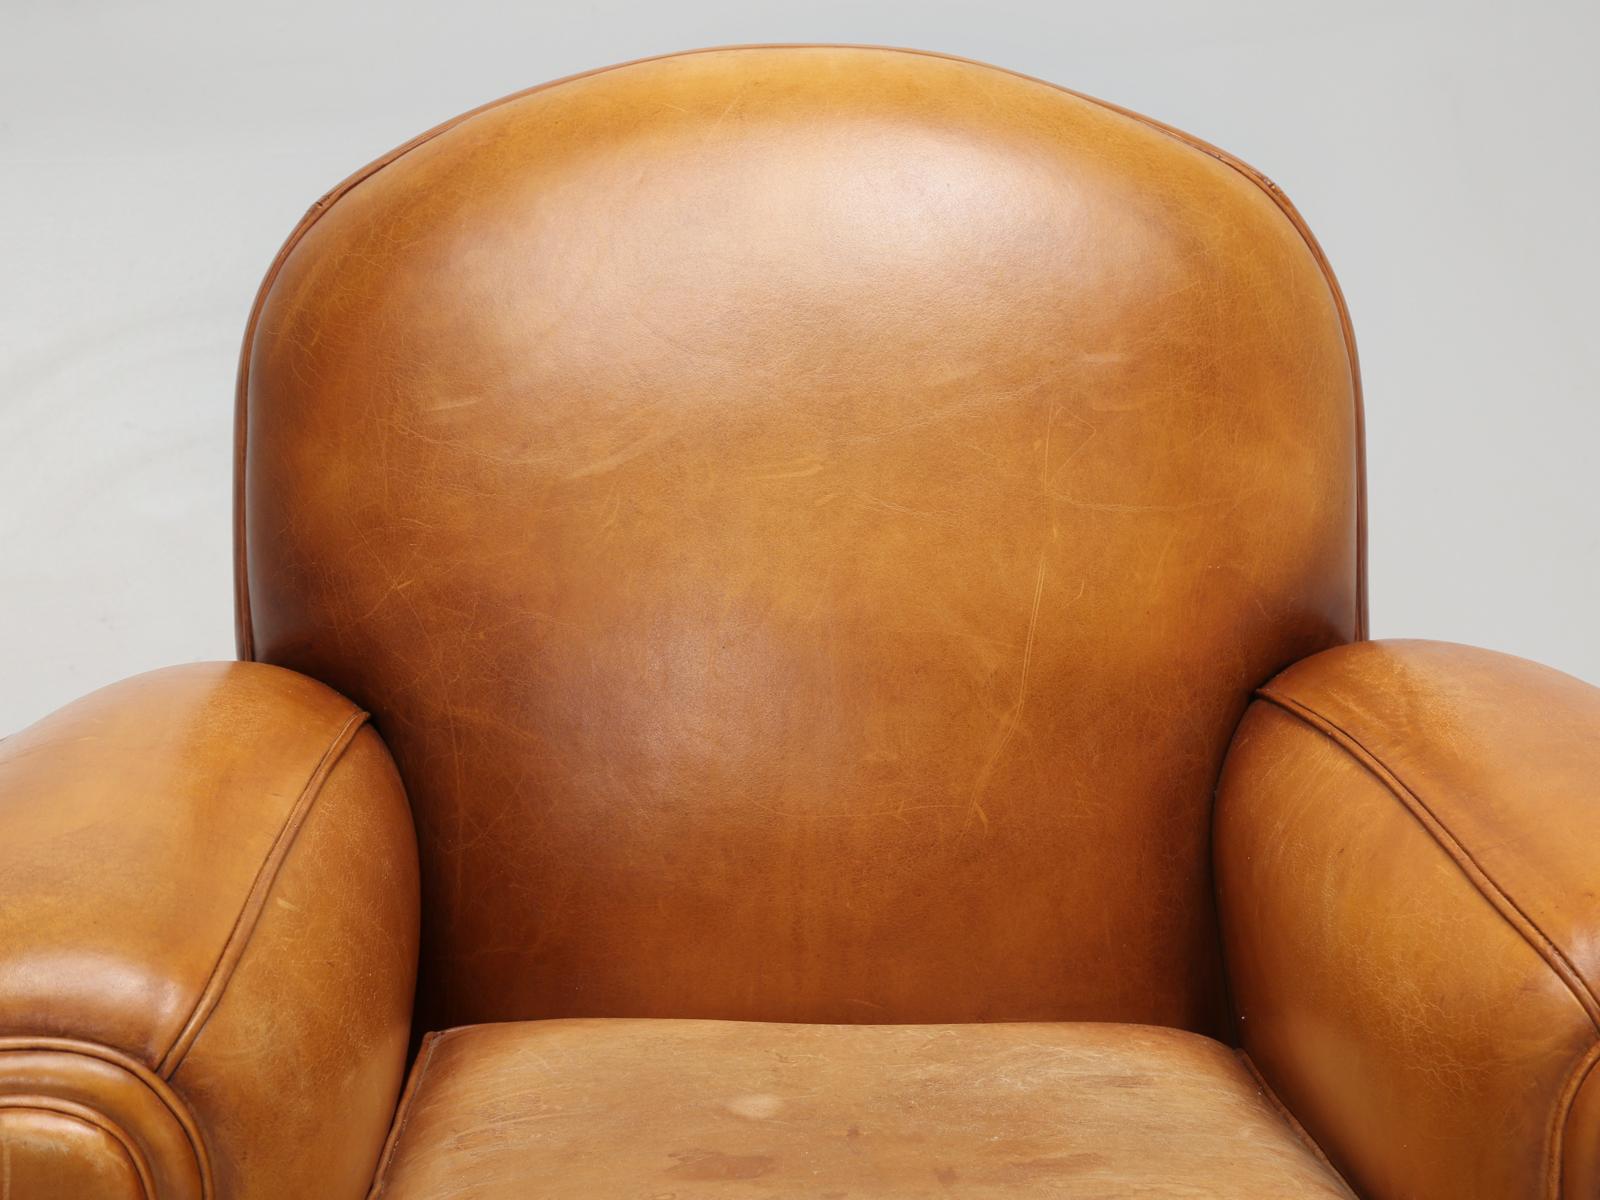 French leather club chairs, that we can safely say, that this particular pair, of French leather club chairs, are in the finest, “all original” condition, that we have seen in the last 25 years. The leather is still extremely soft and as supple, as